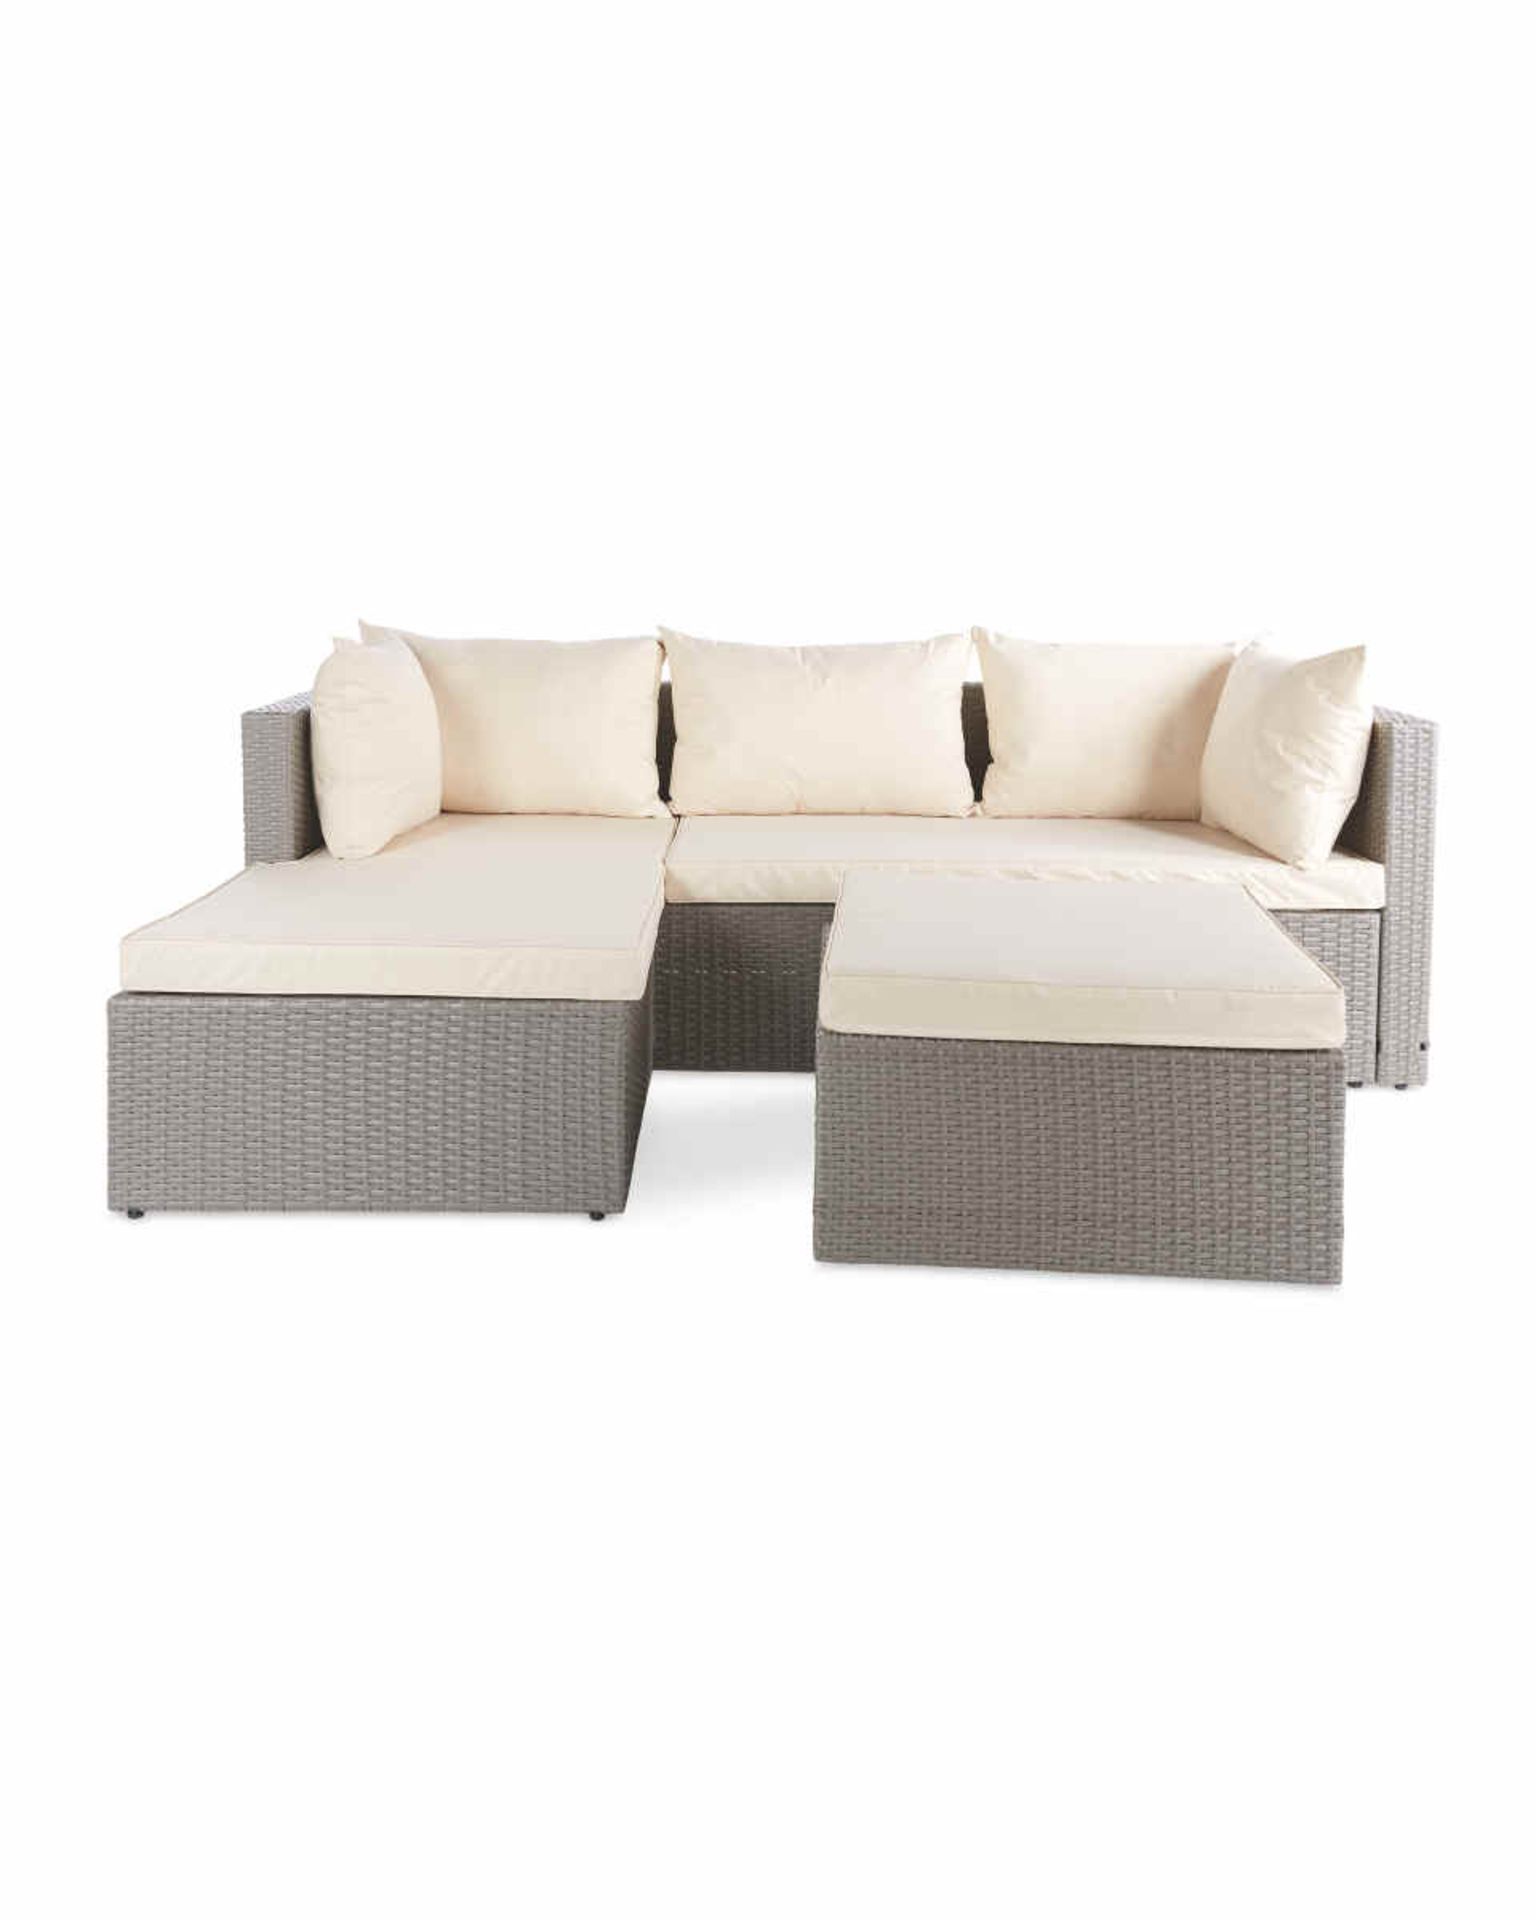 (2109832) Cream/Grey Rattan Sofa With Cover - Image 2 of 2